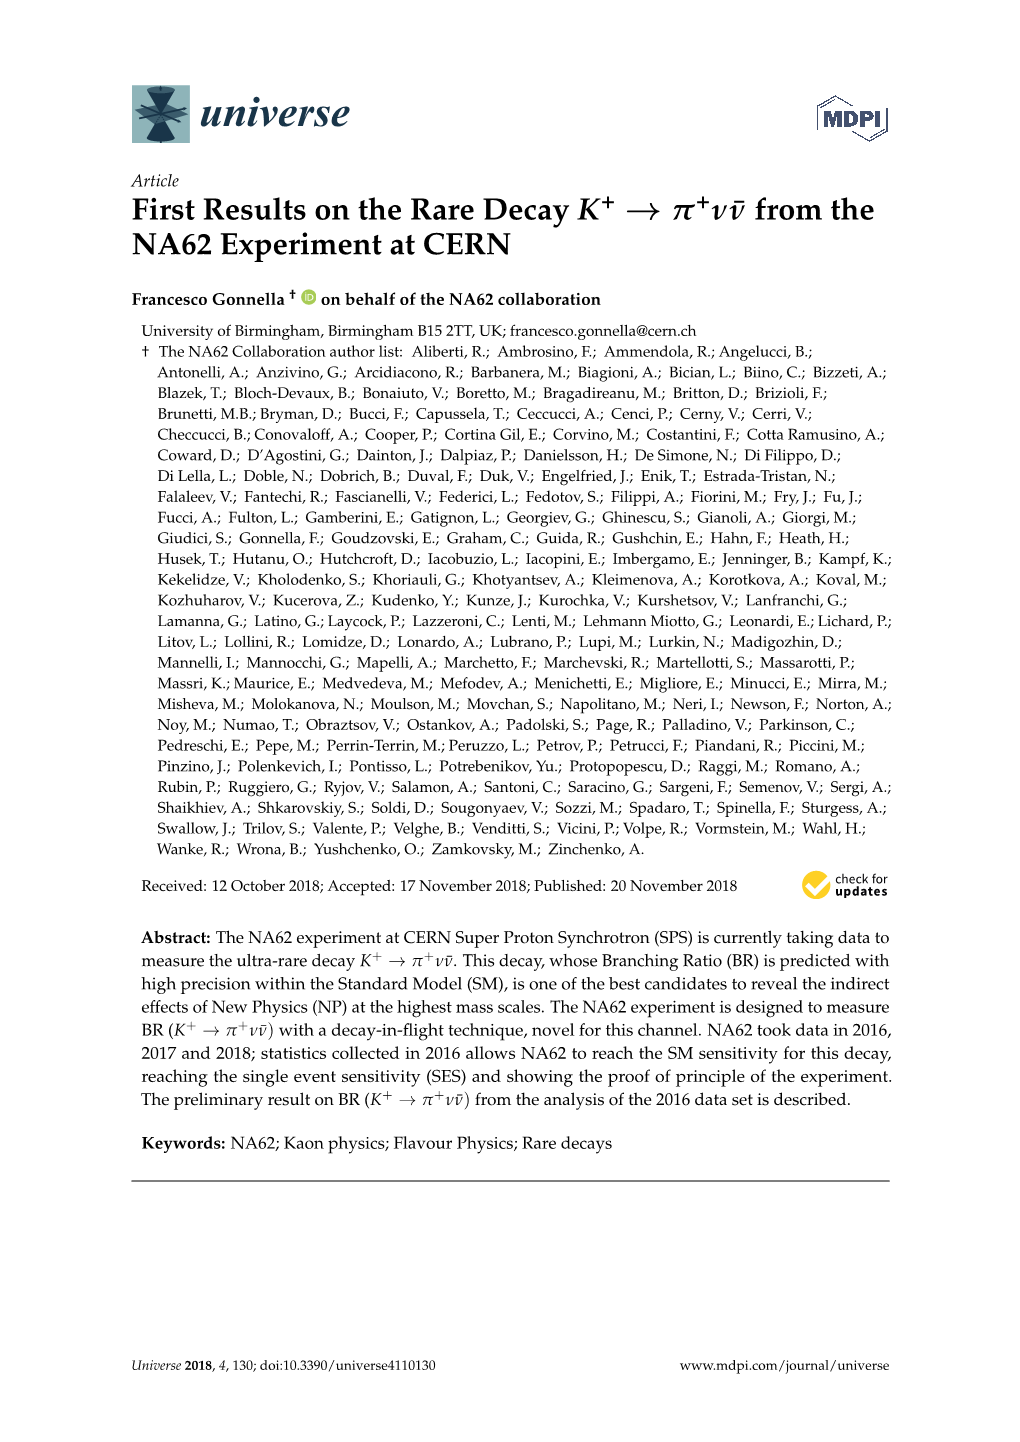 First Results on the Rare Decay K++ from the NA62 Experiment at CERN